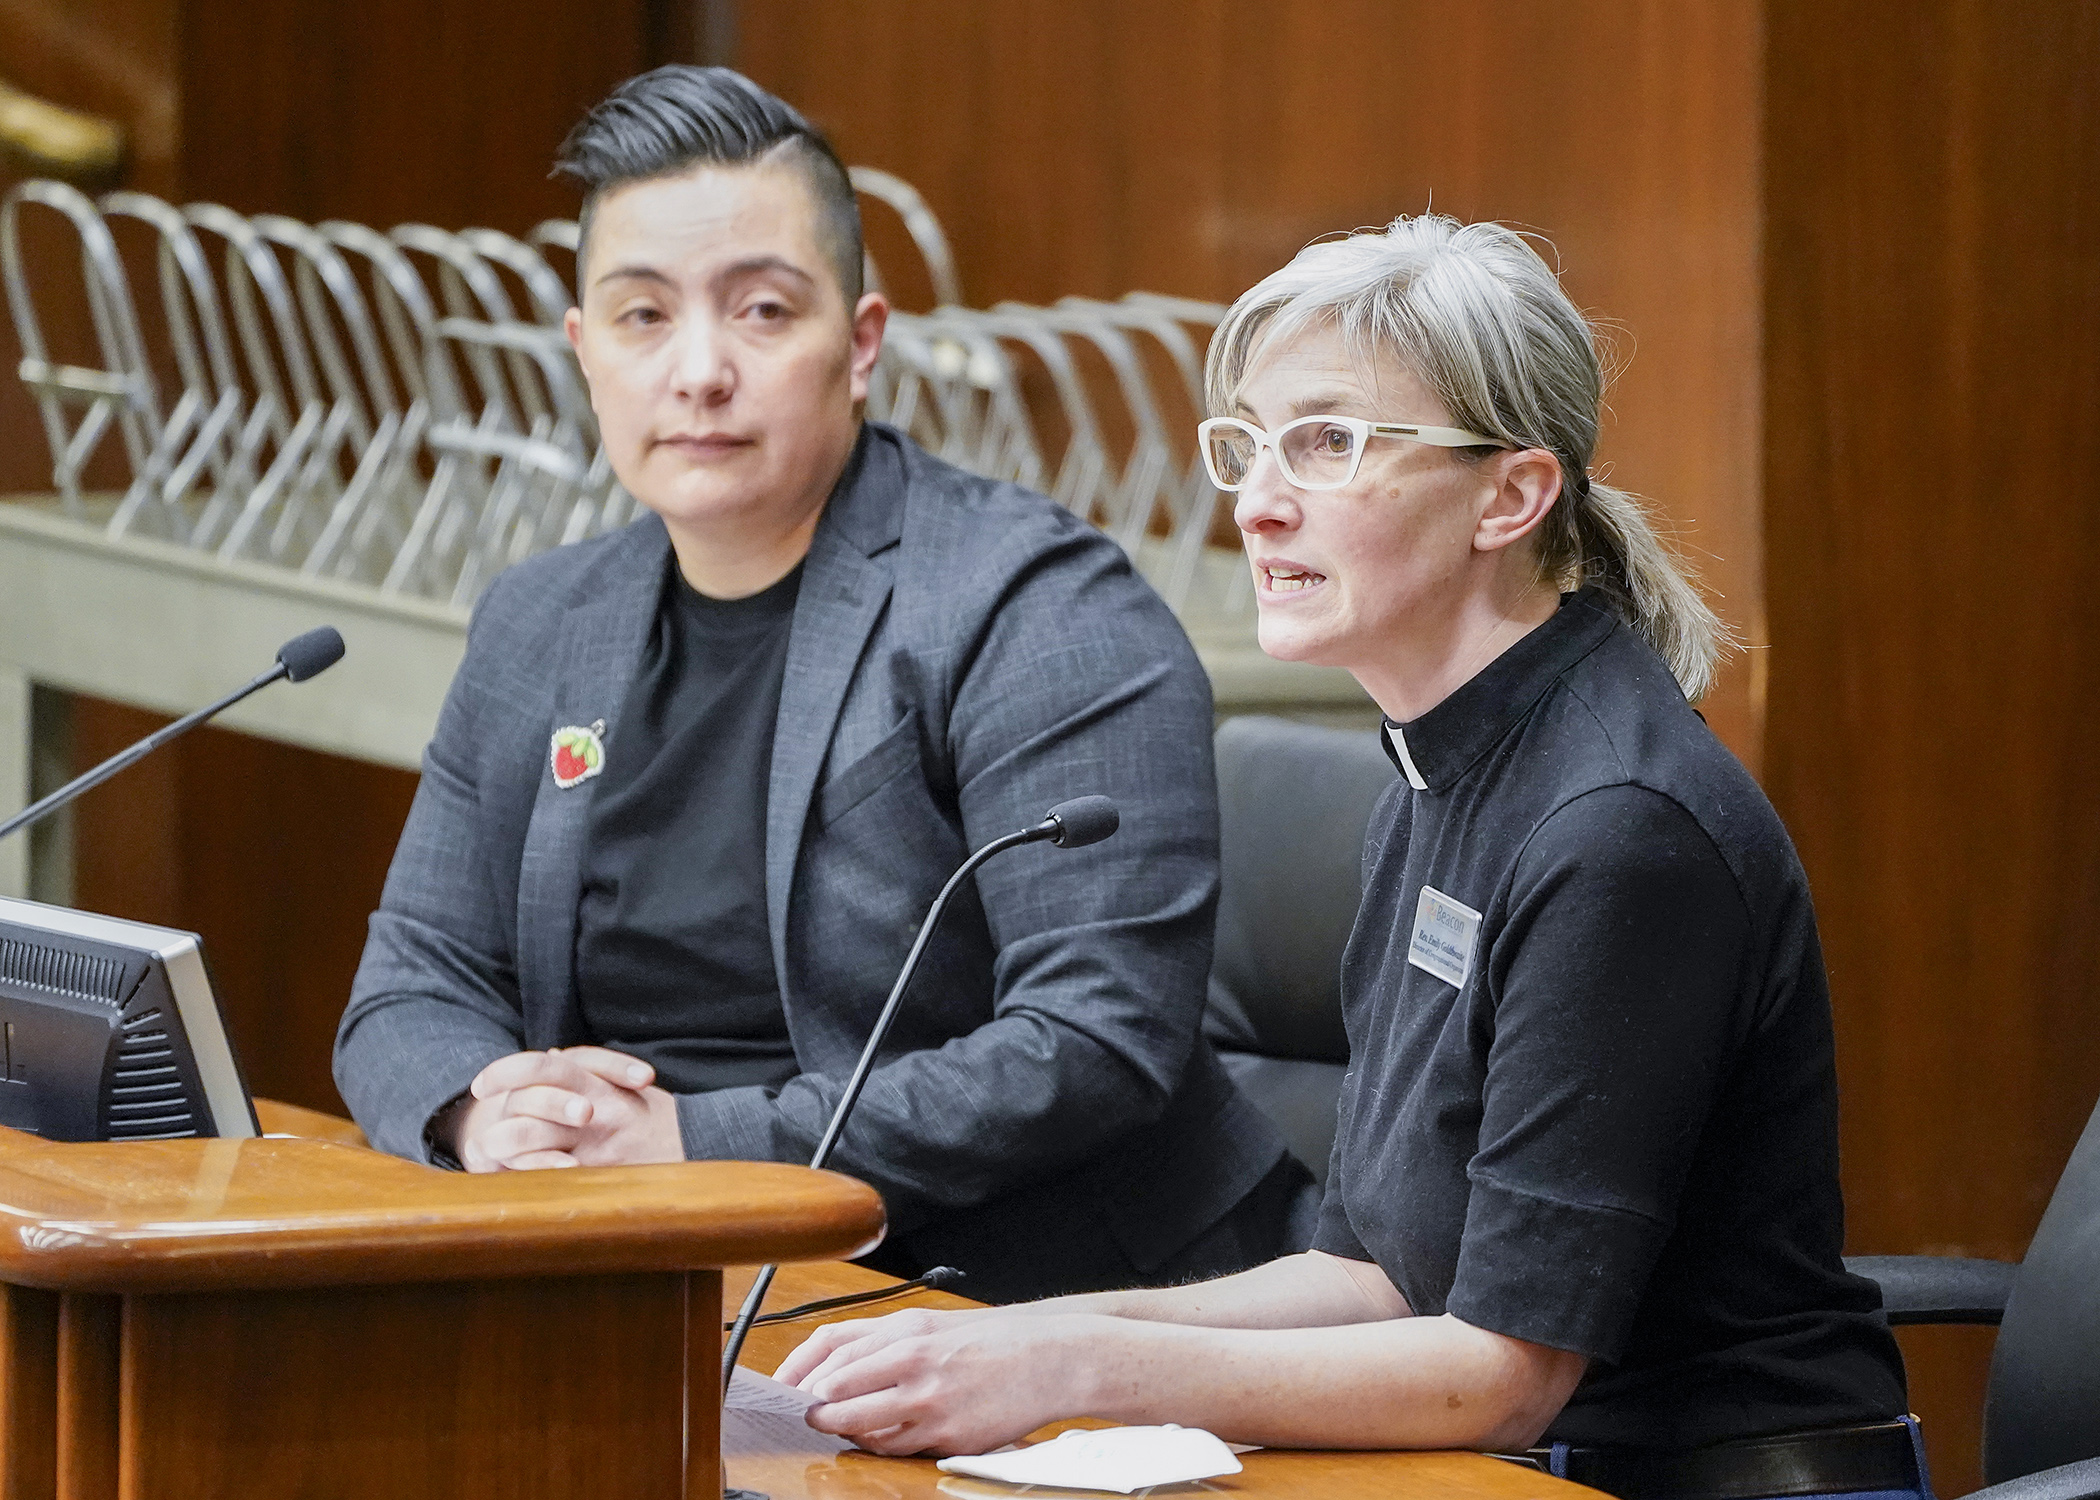 The Rev. Emily Goldthwaite, director of congregational organizing for Beacon Interfaith Housing Collaborative, testifies March 20 on a bill intended to spur development of more multi-family housing units. (Photo by Michele Jokinen)